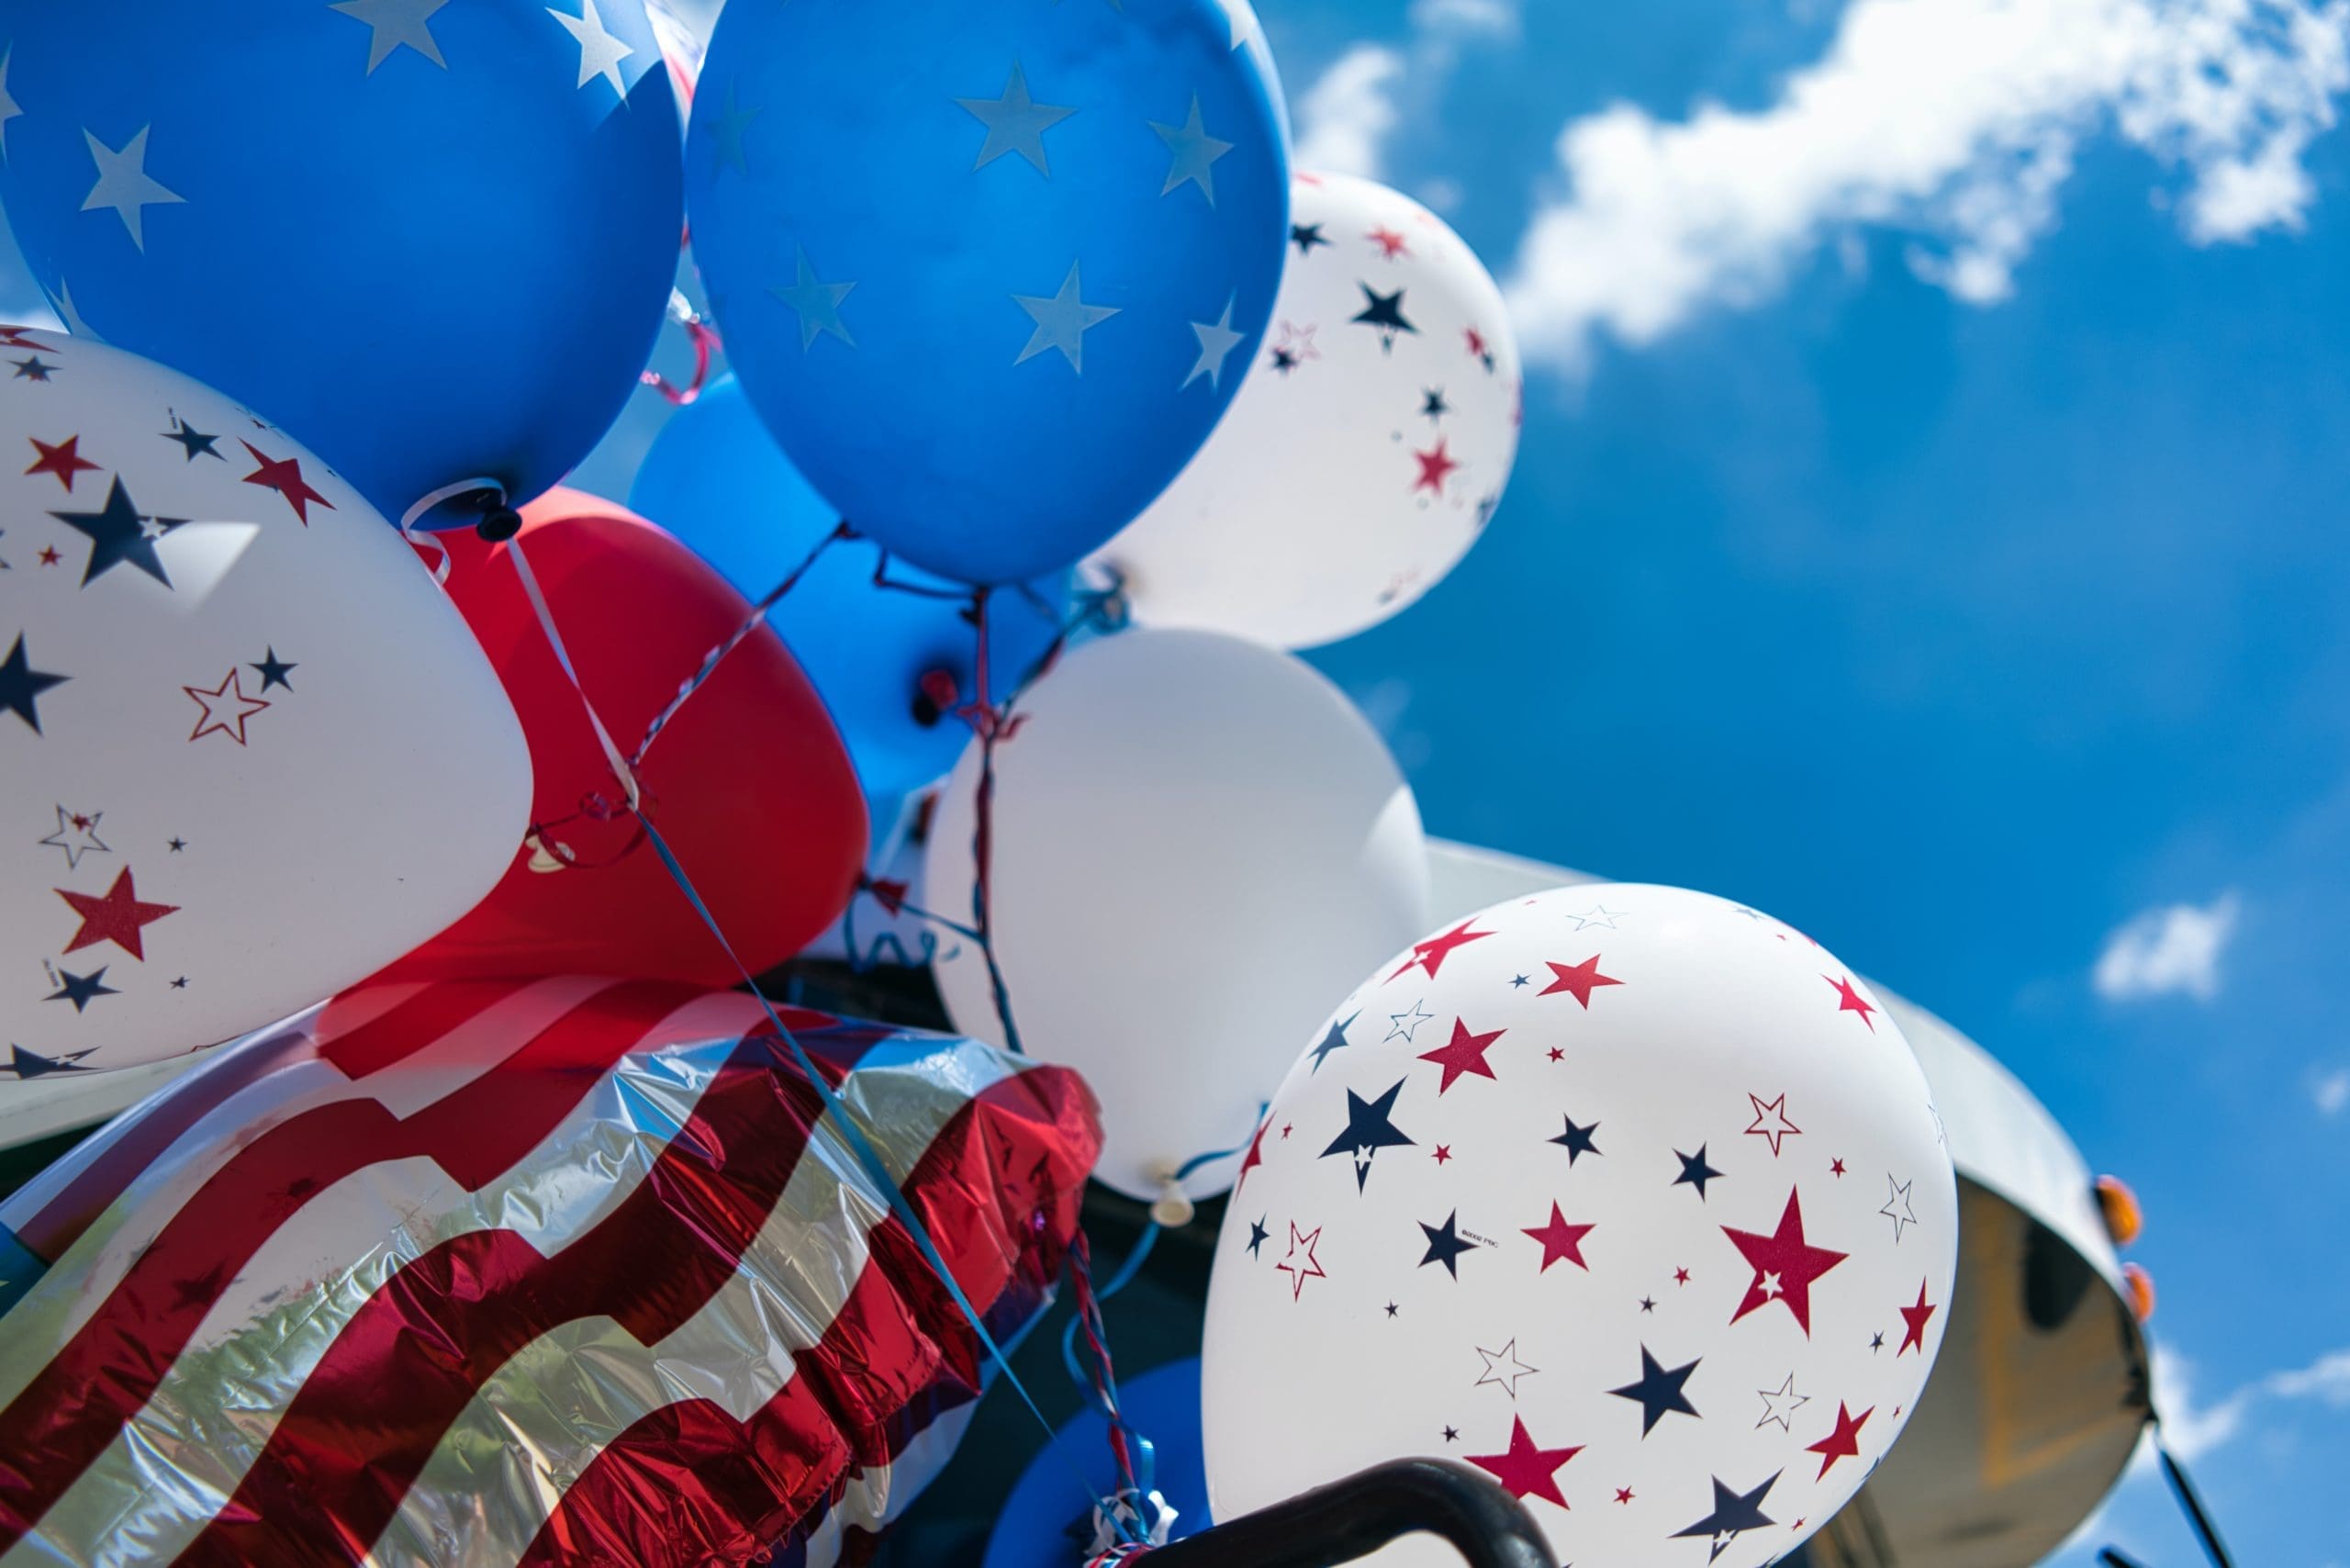 Delaware's July Fourth is sure to include firework displays, beachgoers, live music, and more.